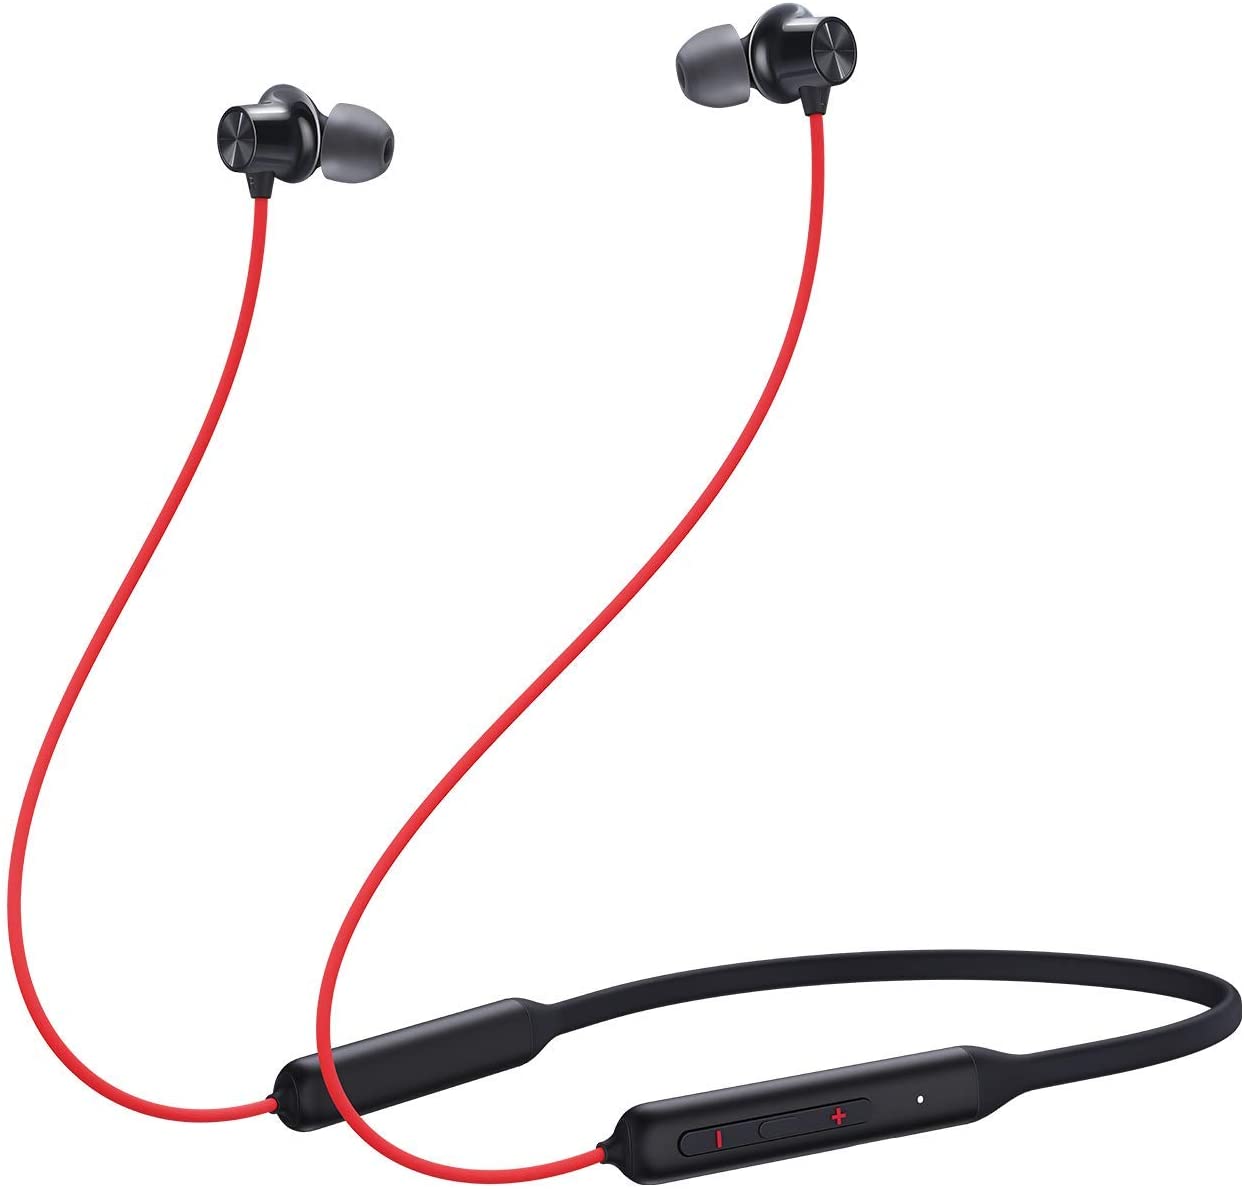 boAt Rockerz 335 vs Oneplus Bullets wireless Z bass edition: Comparision and Features-